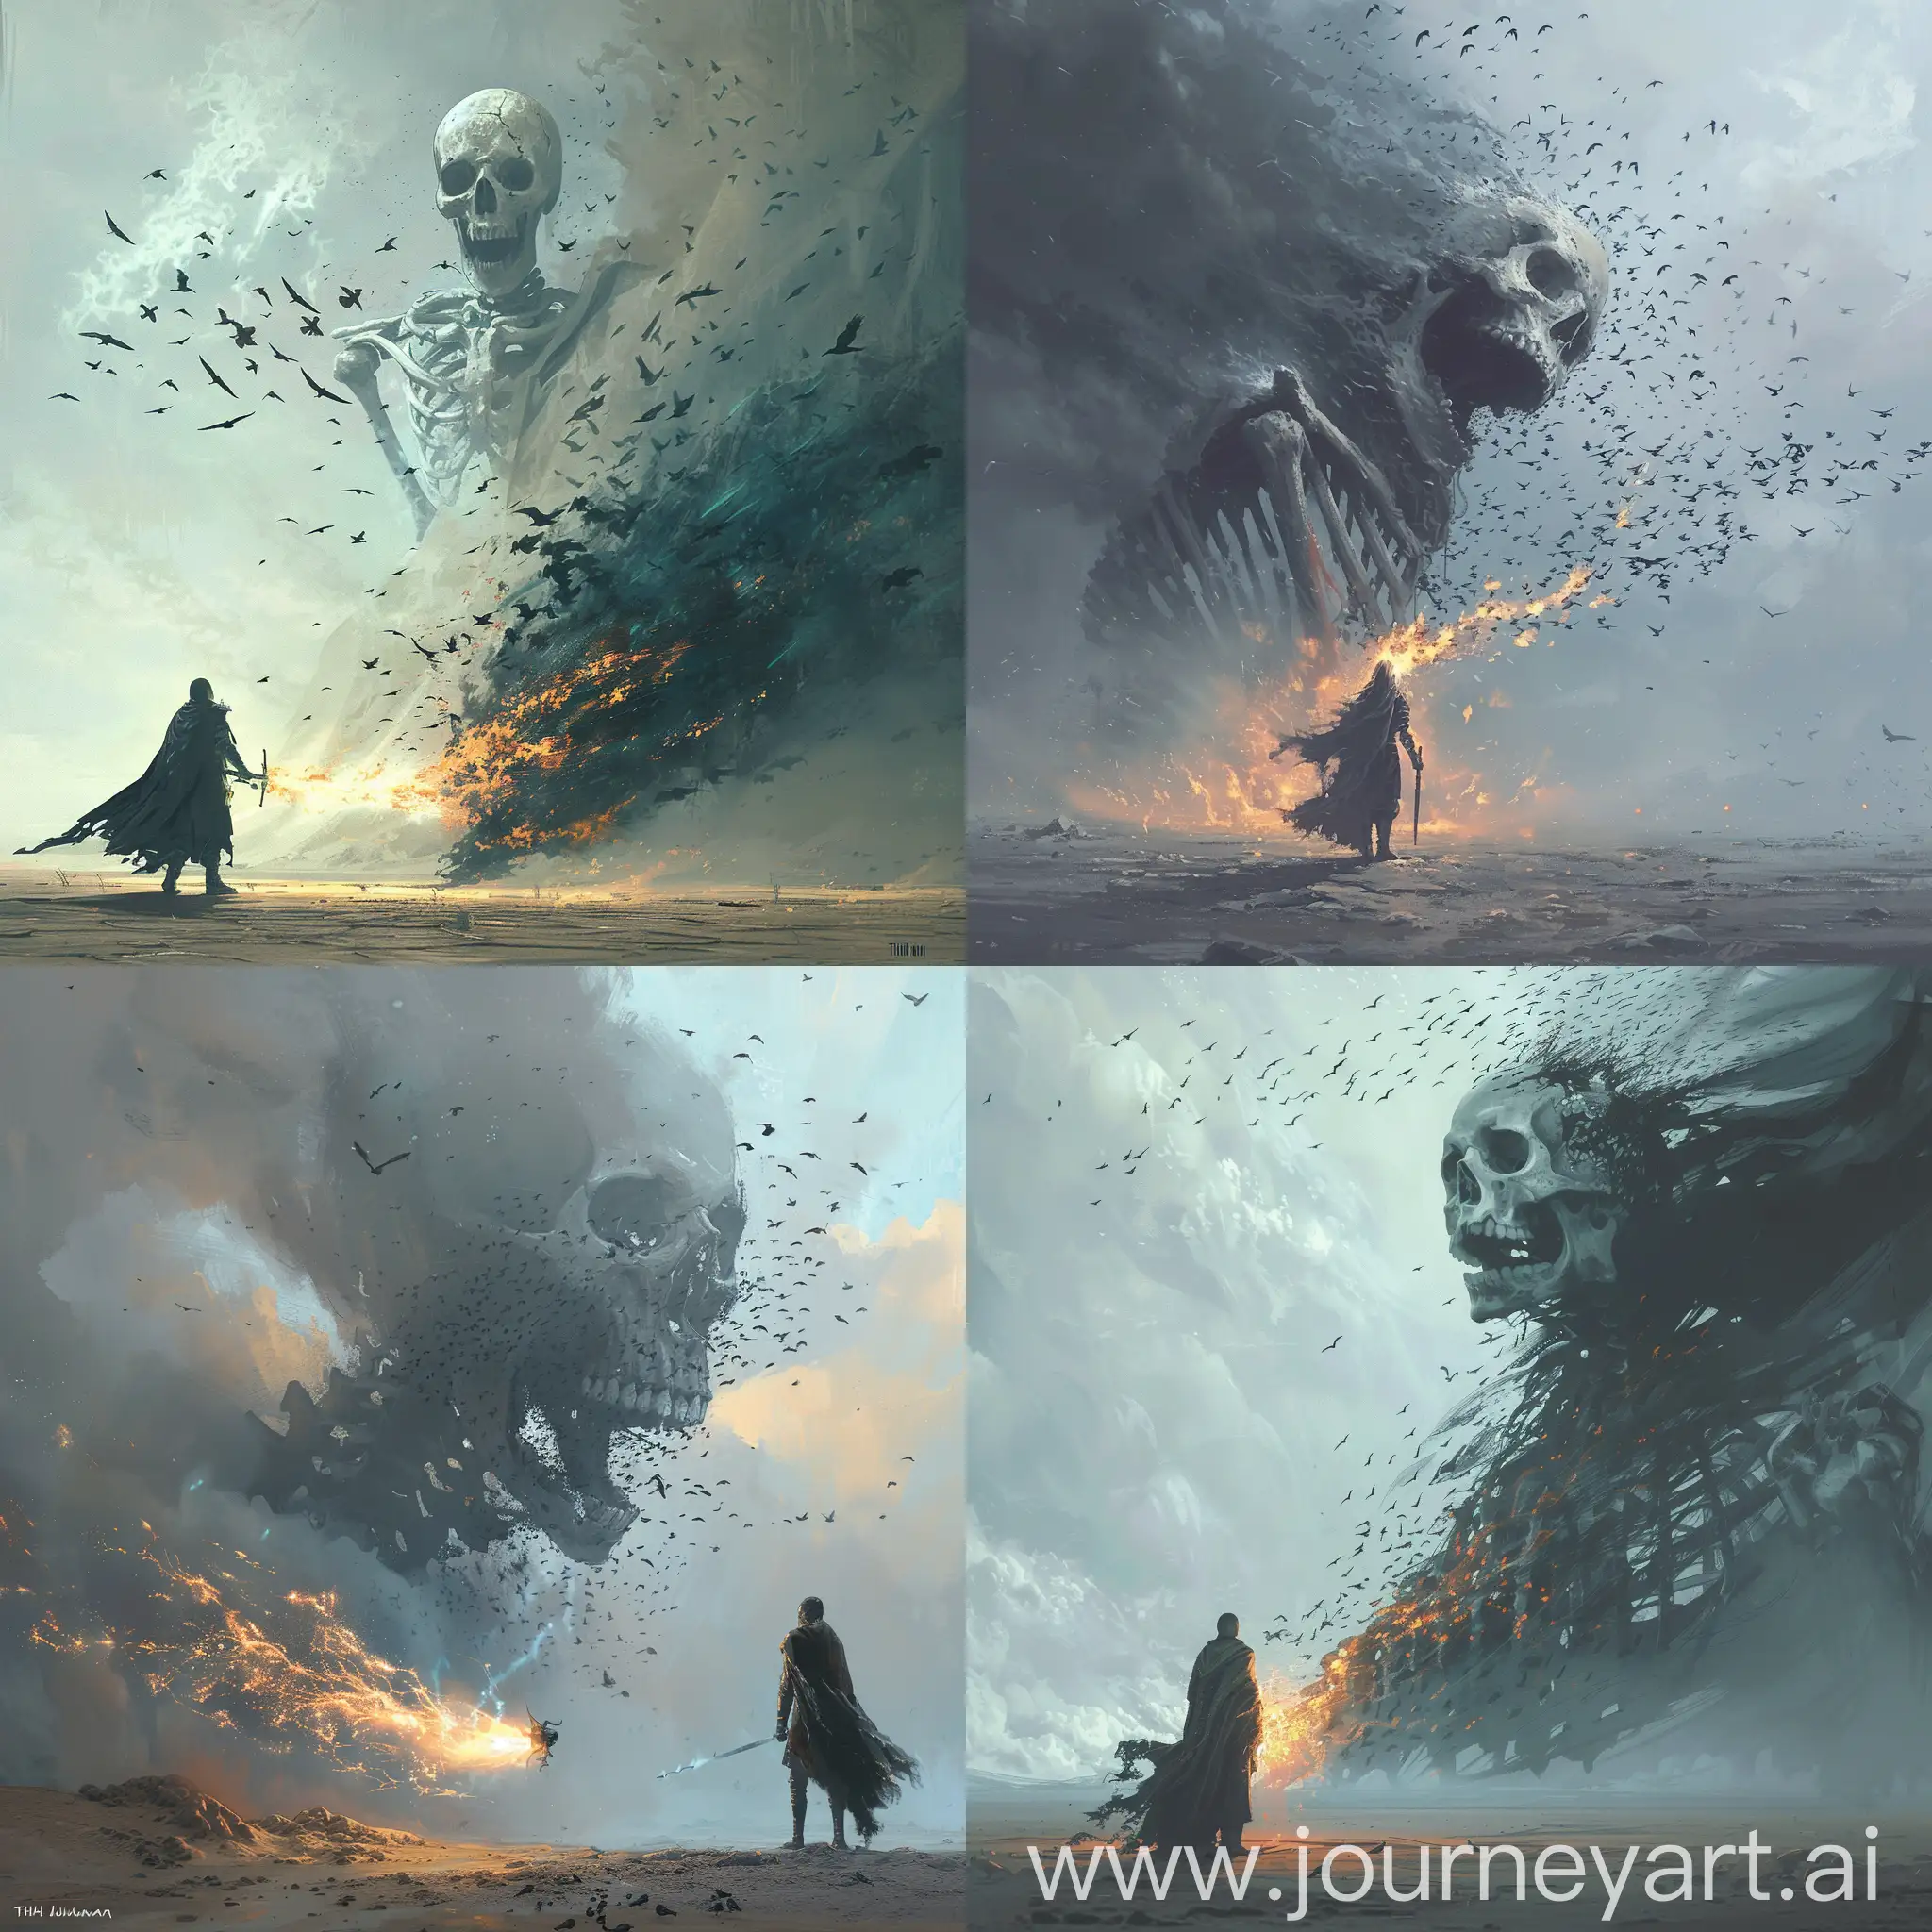  A lone warrior stands defiantly wind blow his cloak in a desolate landscape, wielding a glowing, ethereal weapon. In the background, a gigantic, menacing skeletal figure screaming, partially formed from a chaotic mass of dark birds. The scene is shrouded in an eerie, misty atmosphere, with a color palette of muted greys and ethereal blues. The contrast between the vibrant energy of the warrior's sword made of fire and the dark, chaotic presence of the skeletal figure creates a sense of epic confrontation intricately detailed by Tithi Luadthong, jeremy mann, deep depth of field, dramatic lighting, craig mullins, large bold brush strokes, maximalist, featured on deviant art, Ray Tracing, historical, sinister